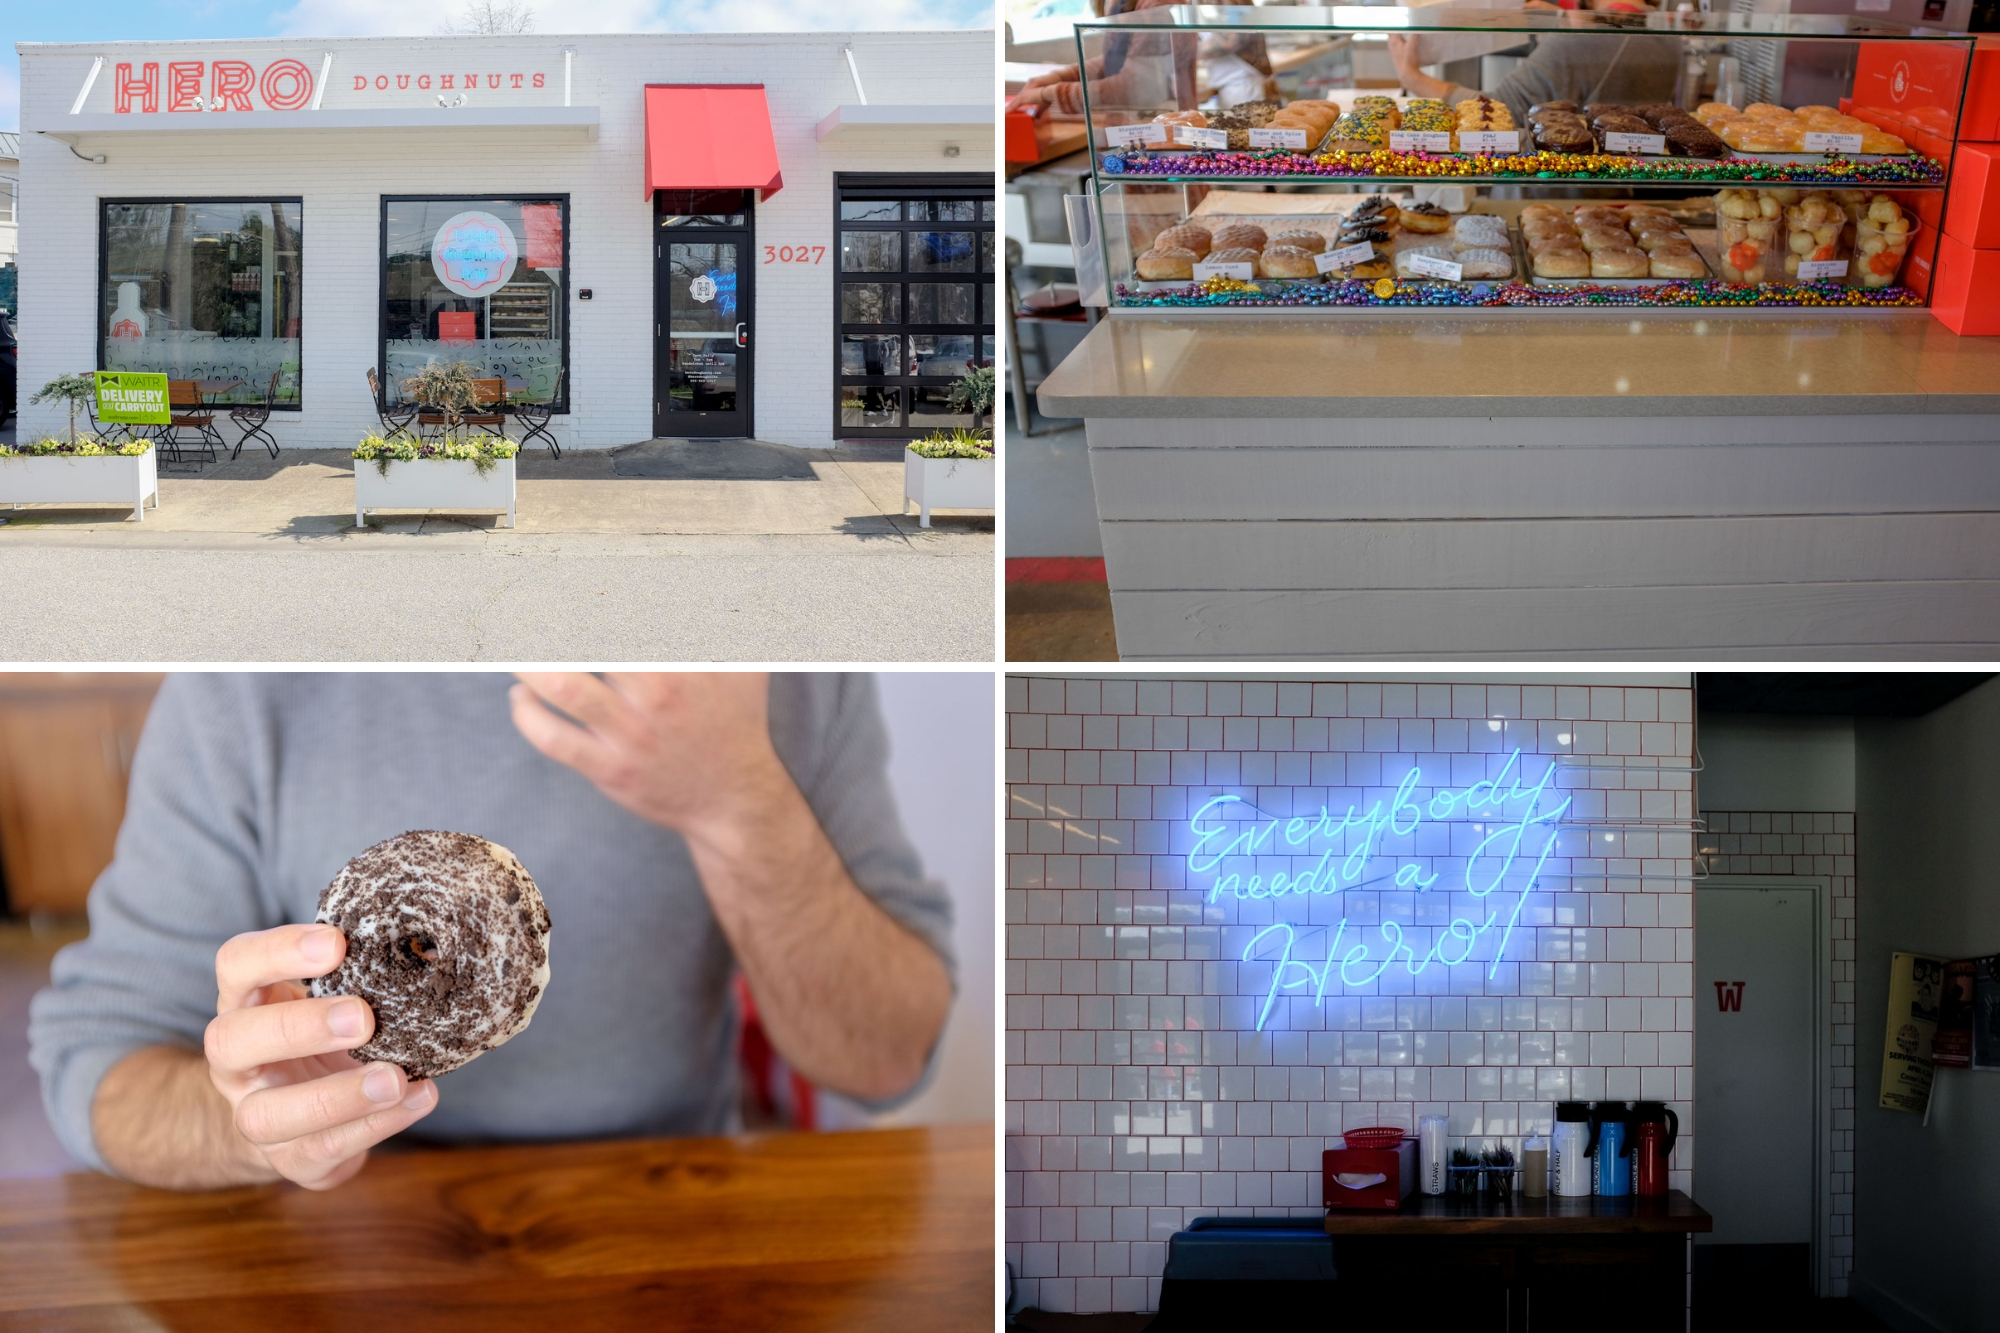 collage of hero doughnuts: exterior, doughnut case, michael eating a cookies and cream doughnut, and a neon sign that says "everybody needs a hero"